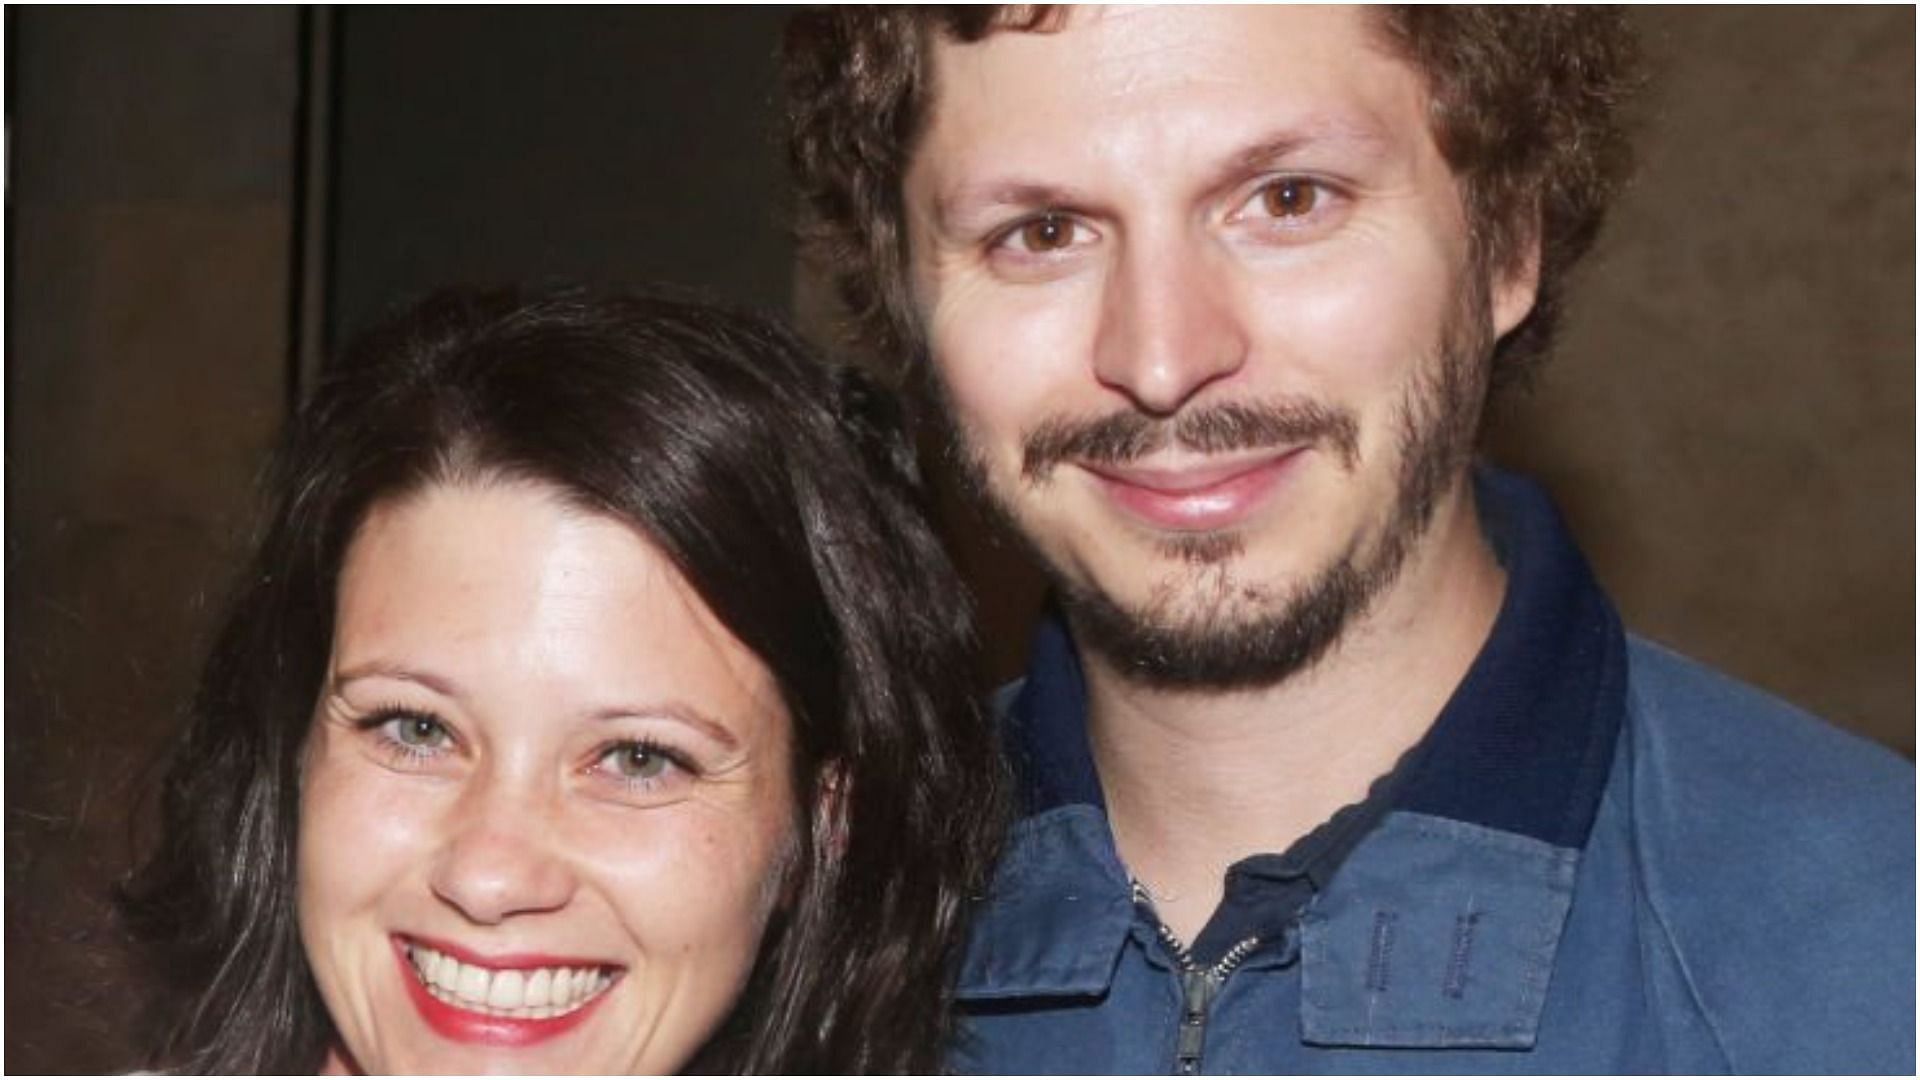 Michael Cera and Nadine welcomed their first child together (Image via Bruce Glikas/Getty Images)